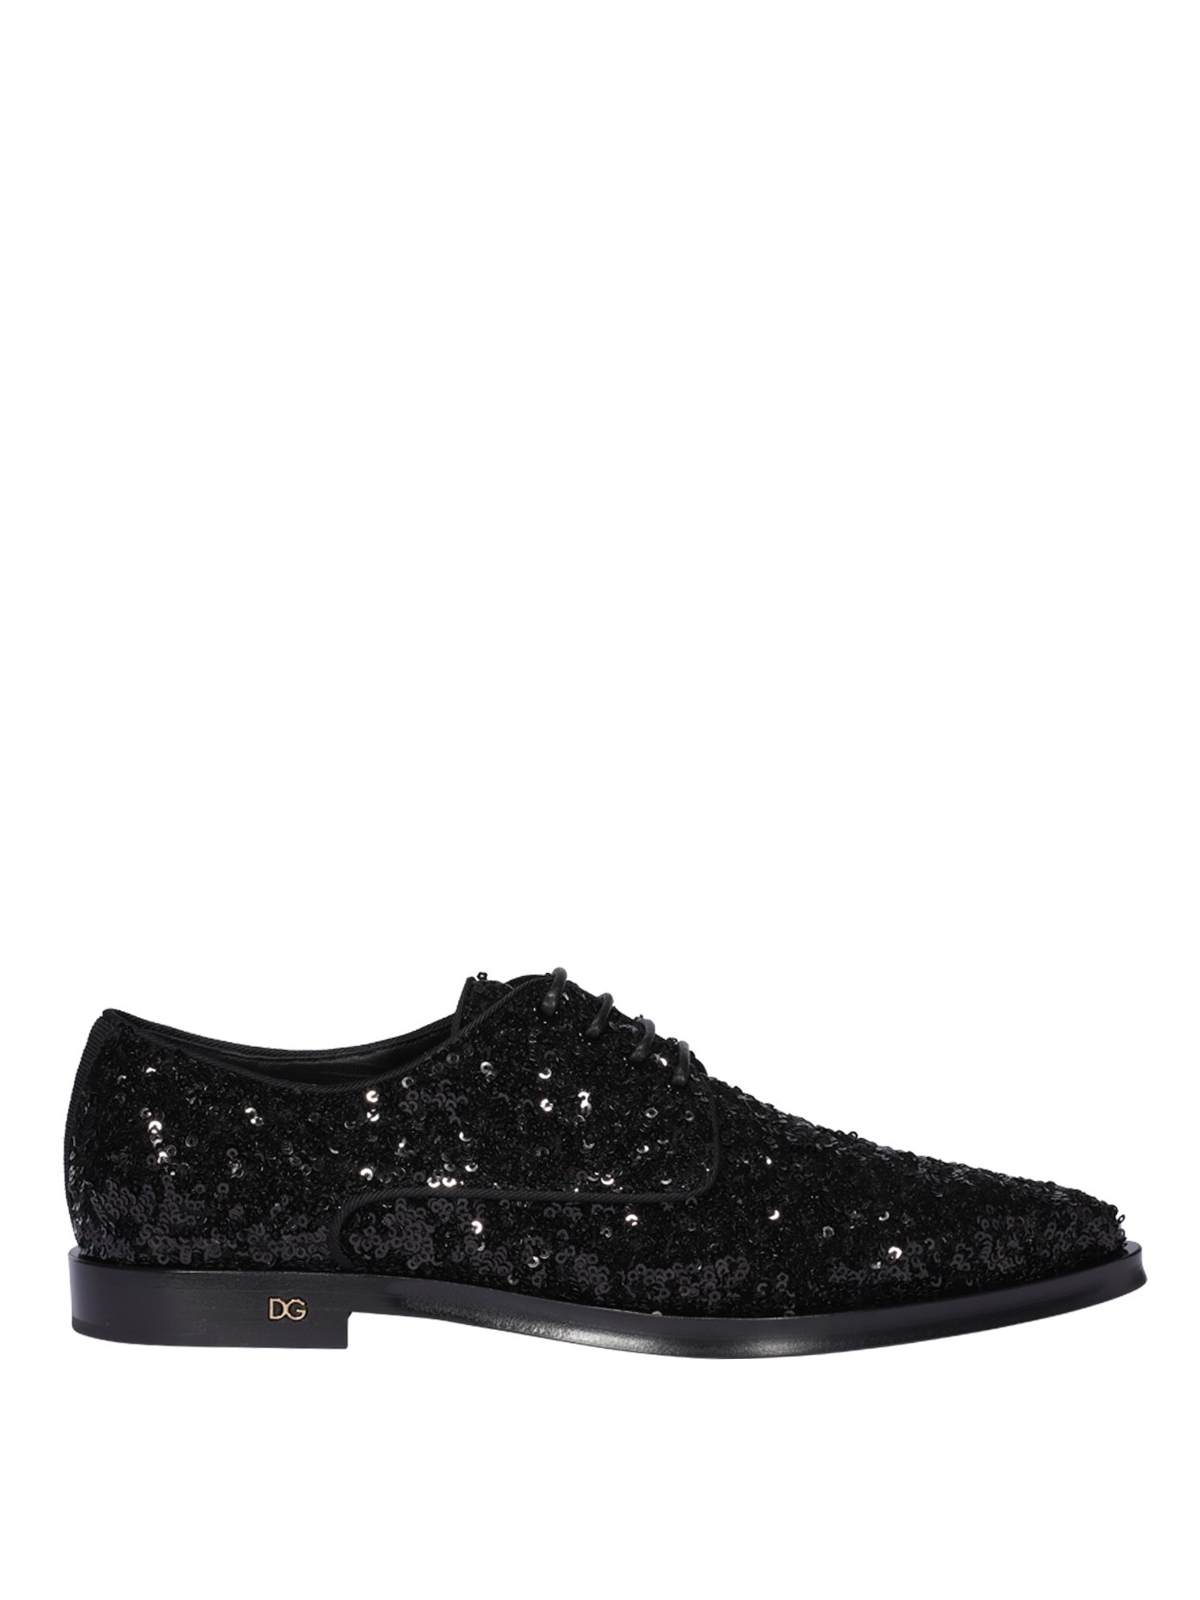 DOLCE & GABBANA SEQUINED DERBY SHOES